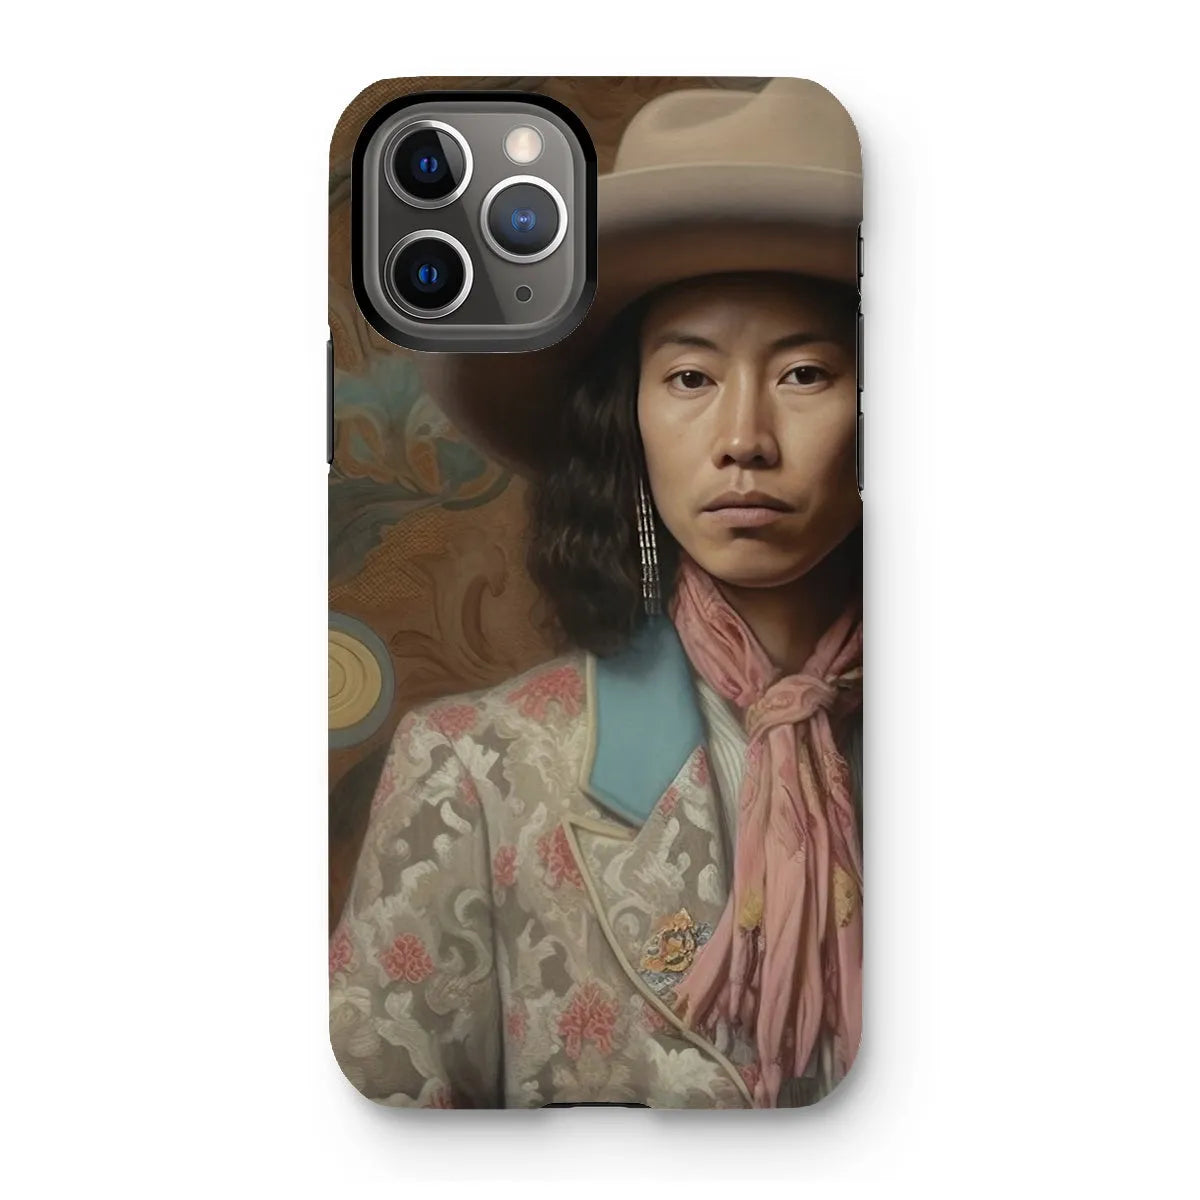 Dorjee The Gay Cowboy - Dandy Gay Aesthetic Art Phone Case - Iphone 11 Pro / Matte - Mobile Phone Cases - Aesthetic Art